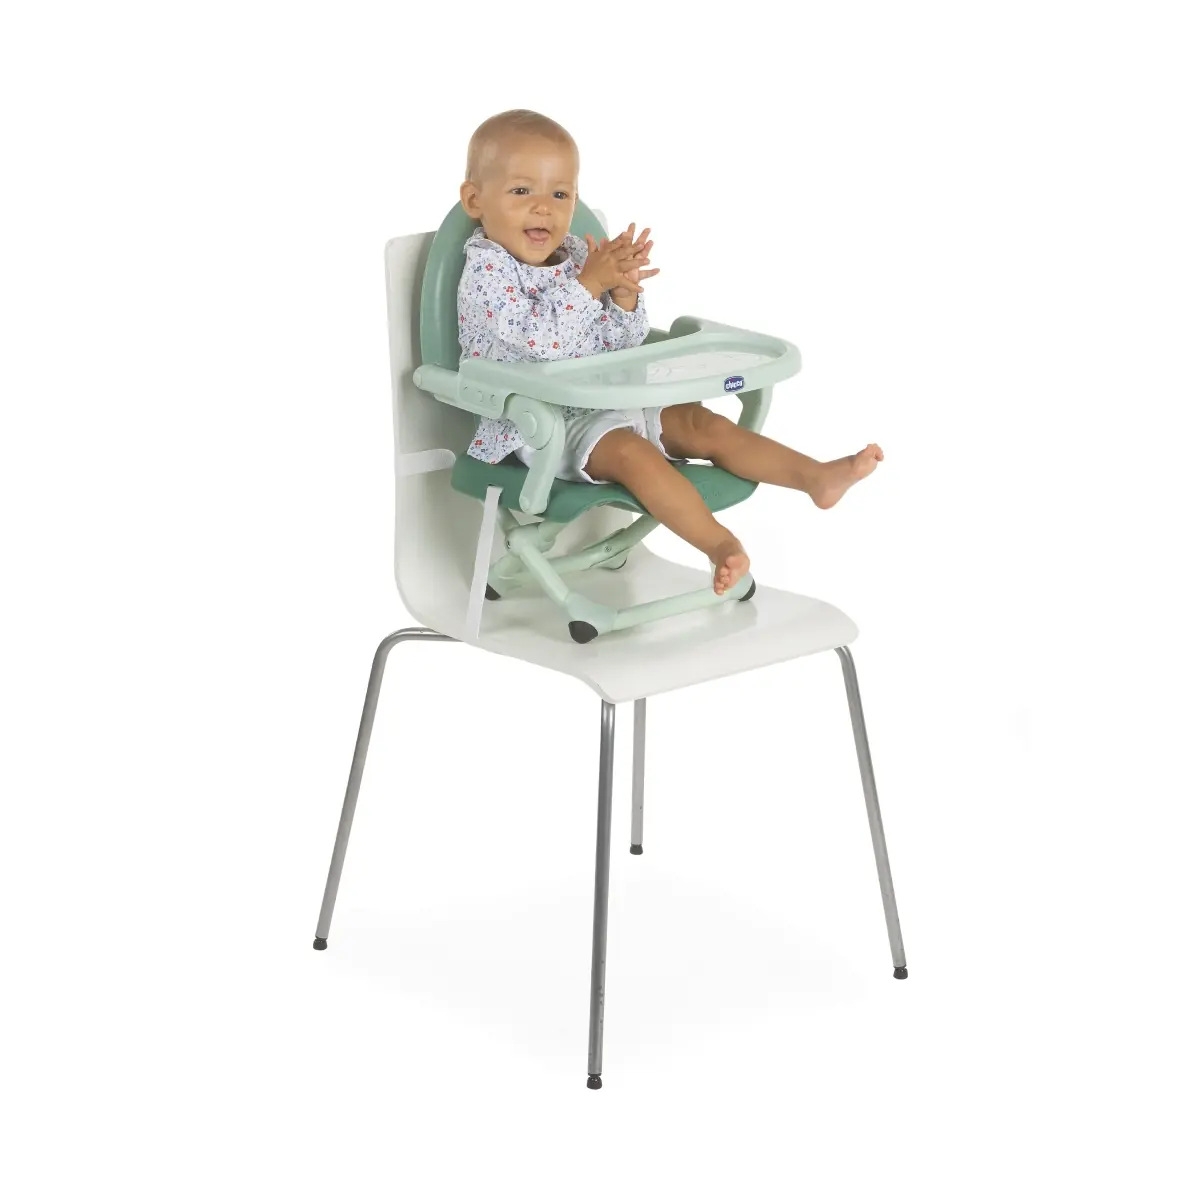 Chicco Baby Products  Car Seats, Strollers, Highchairs & More